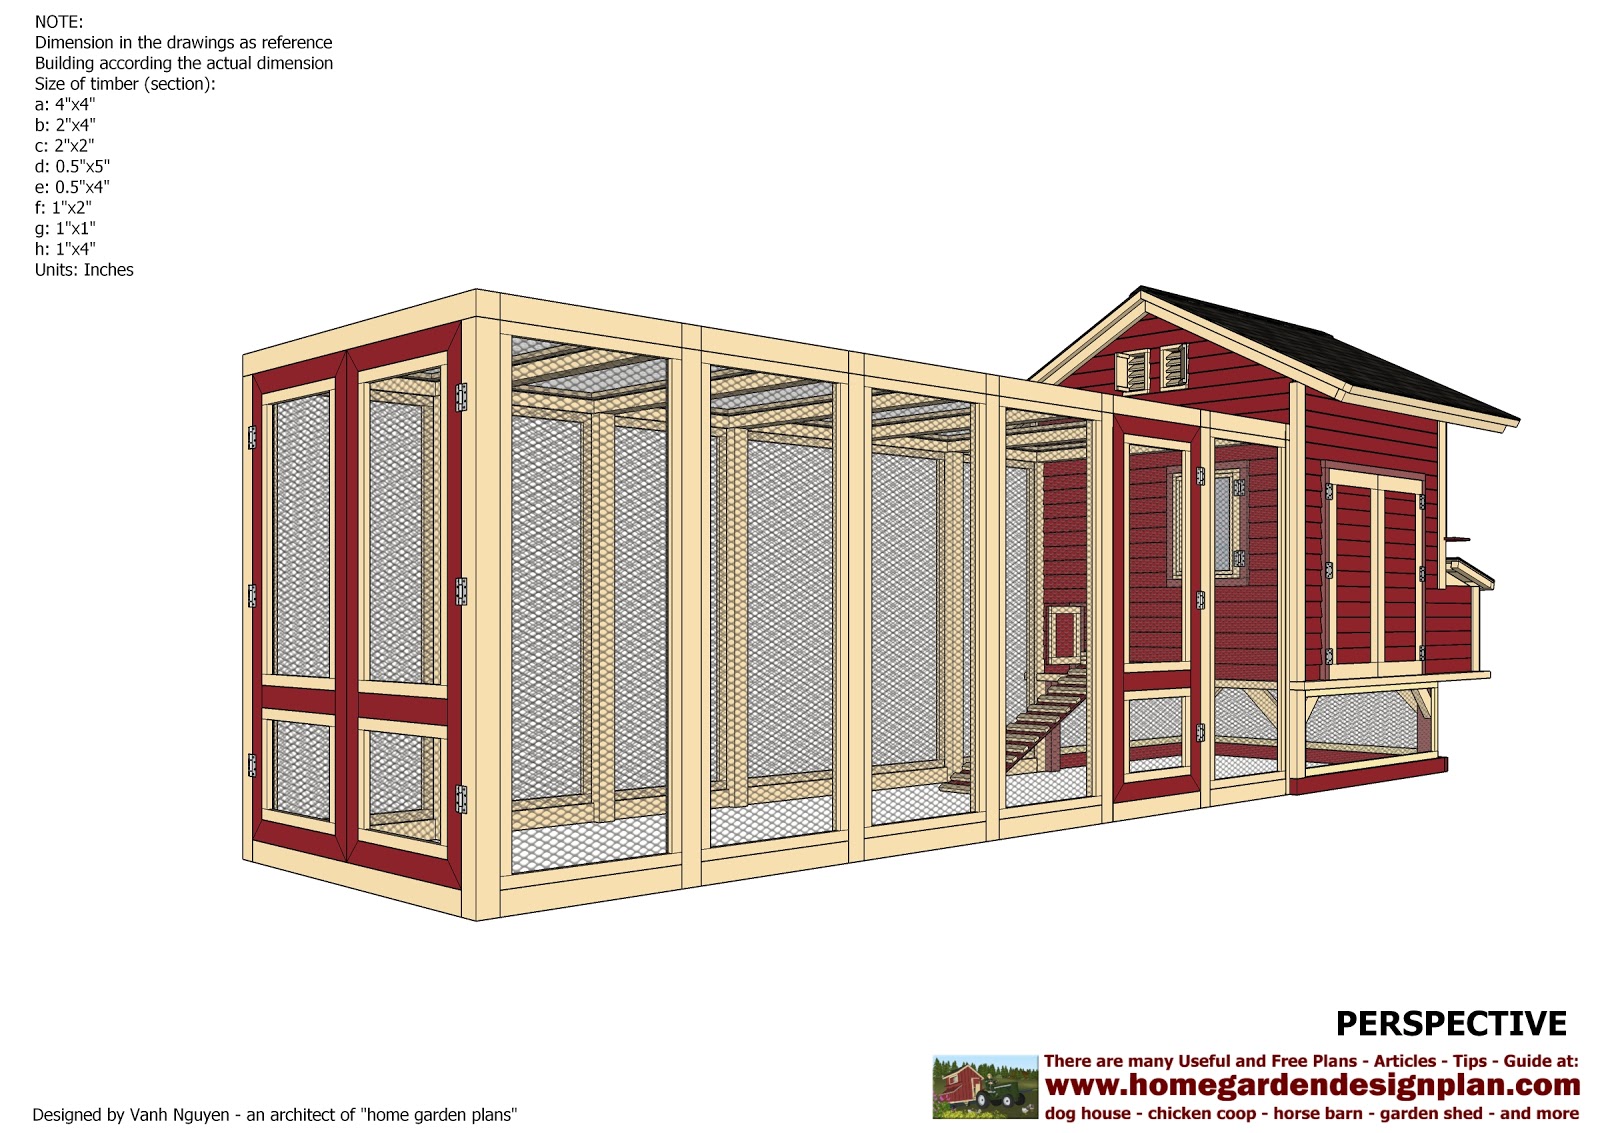 Coop guide: Next topic Chicken coop run construction - 0.6+ +chicken+coop+plans+construction+ +chicken+coop+plans+pDf